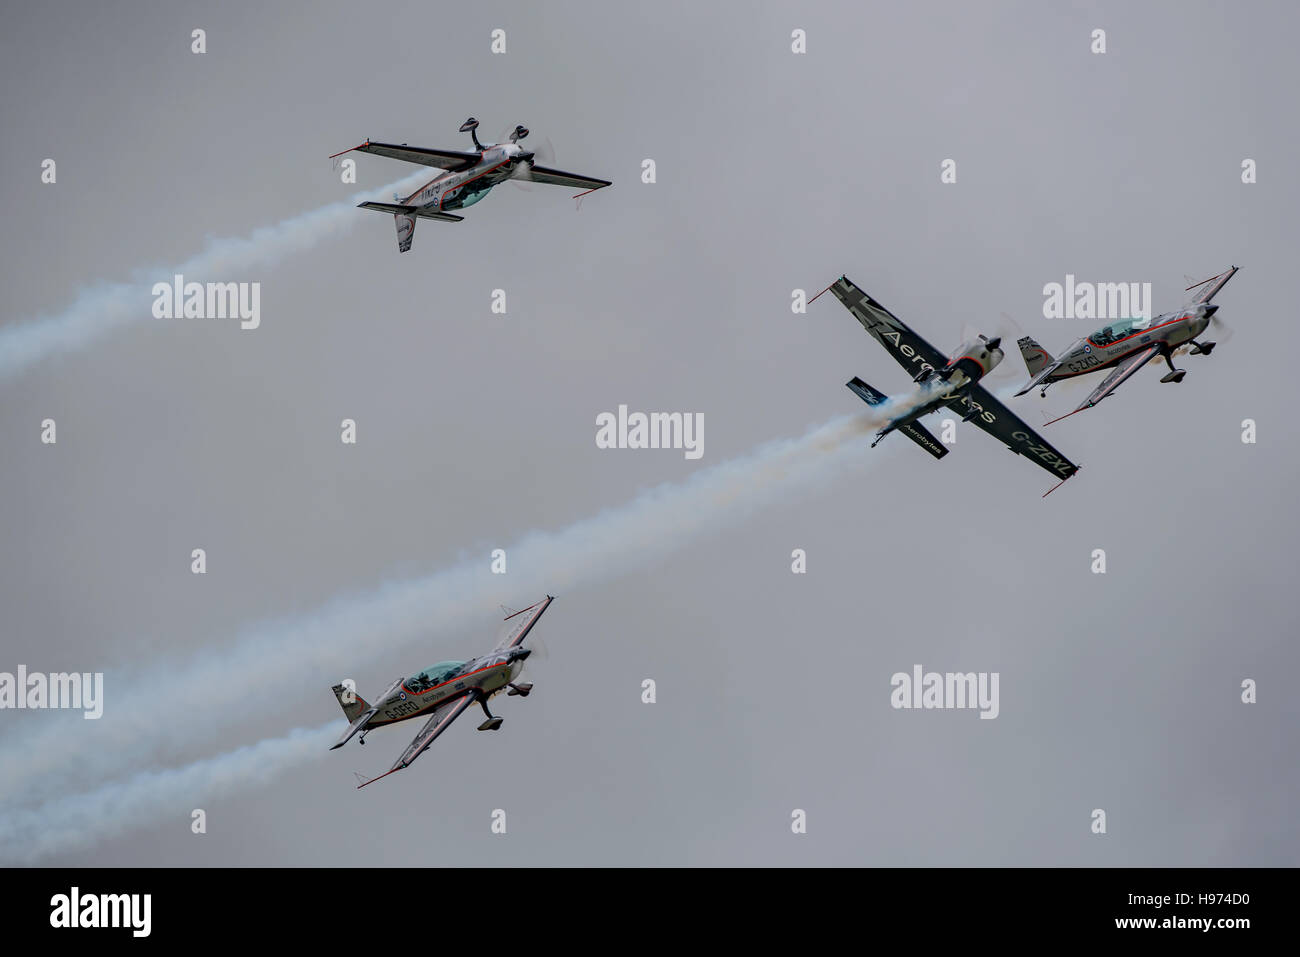 'Crazy Flying' by The Blades Aerobatic Team. Stock Photo